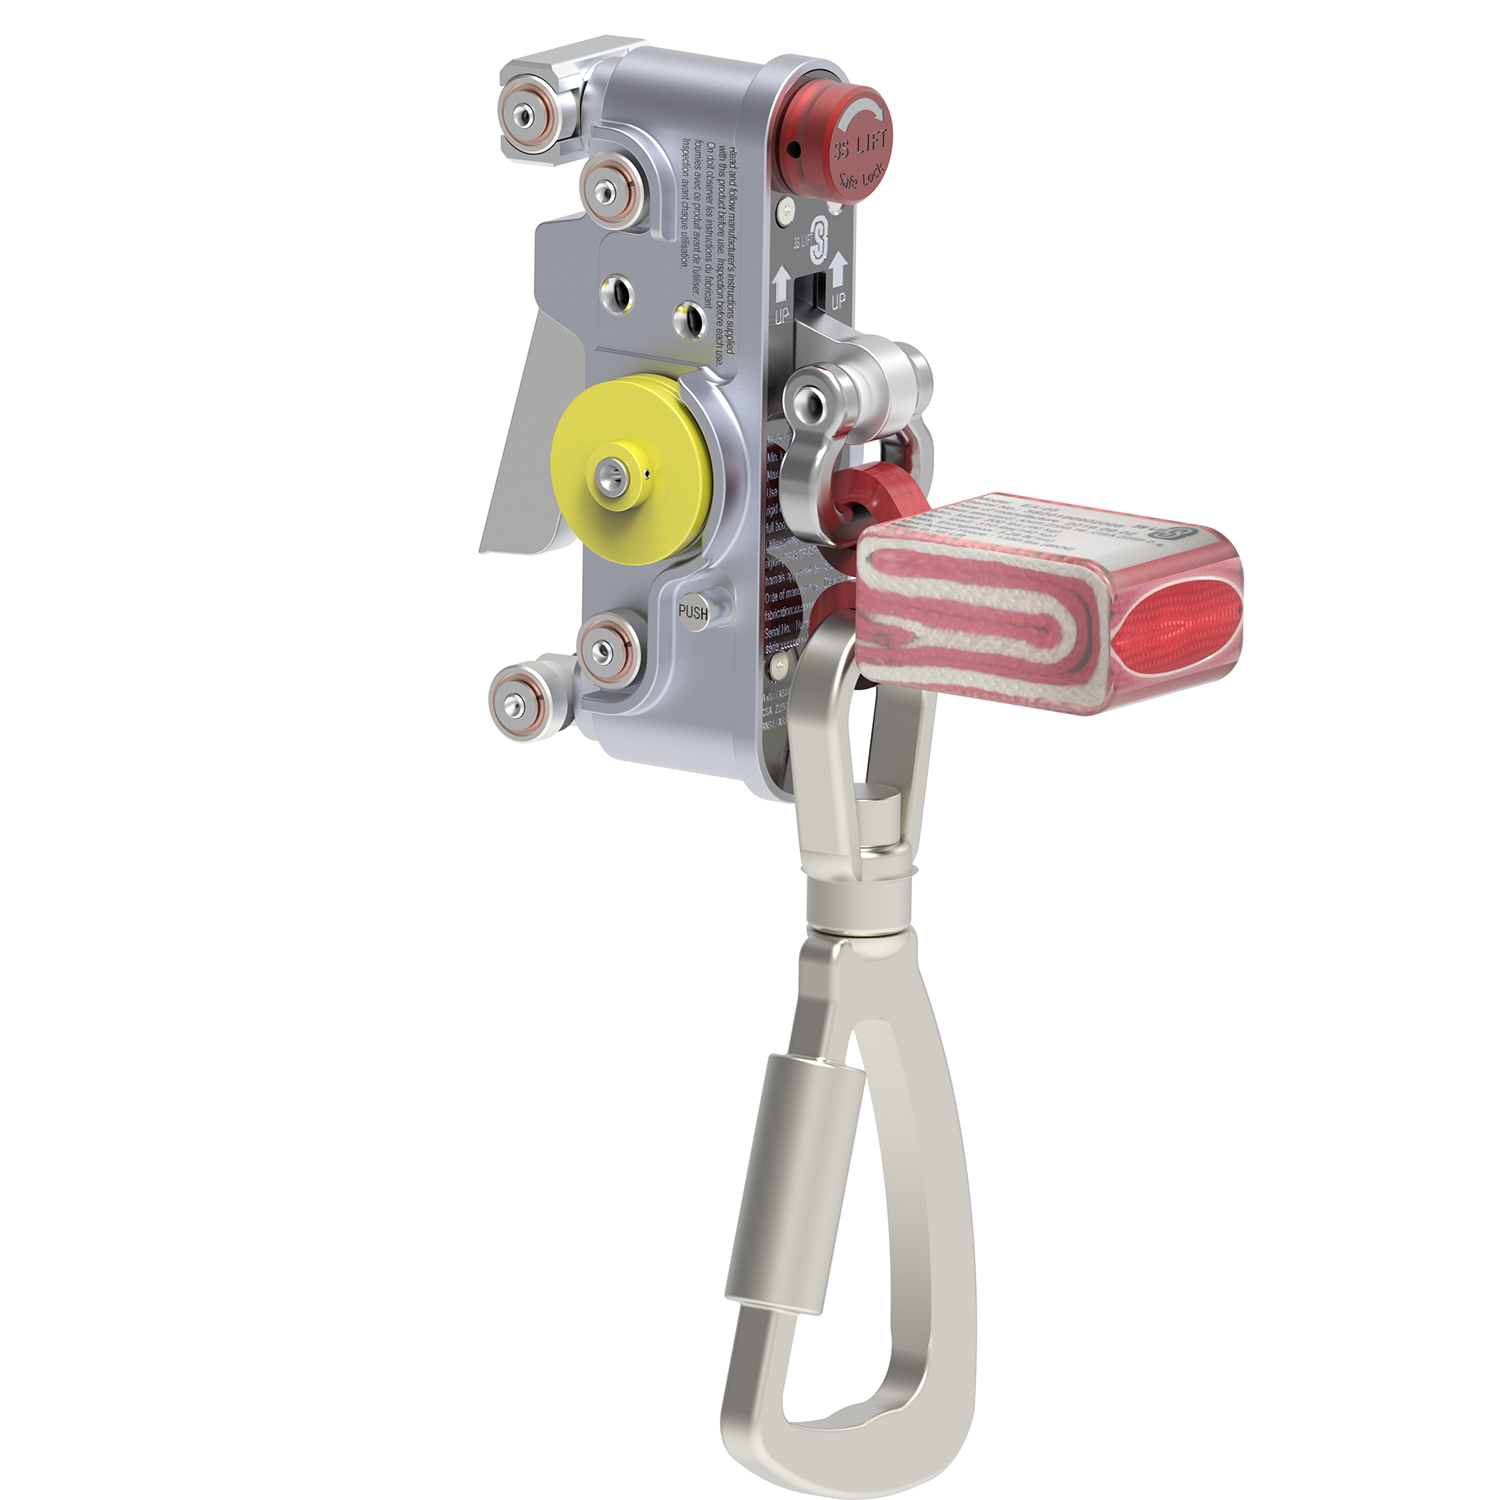 3S Lift SL-R60S Guiderail Fall Arrester from Columbia Safety